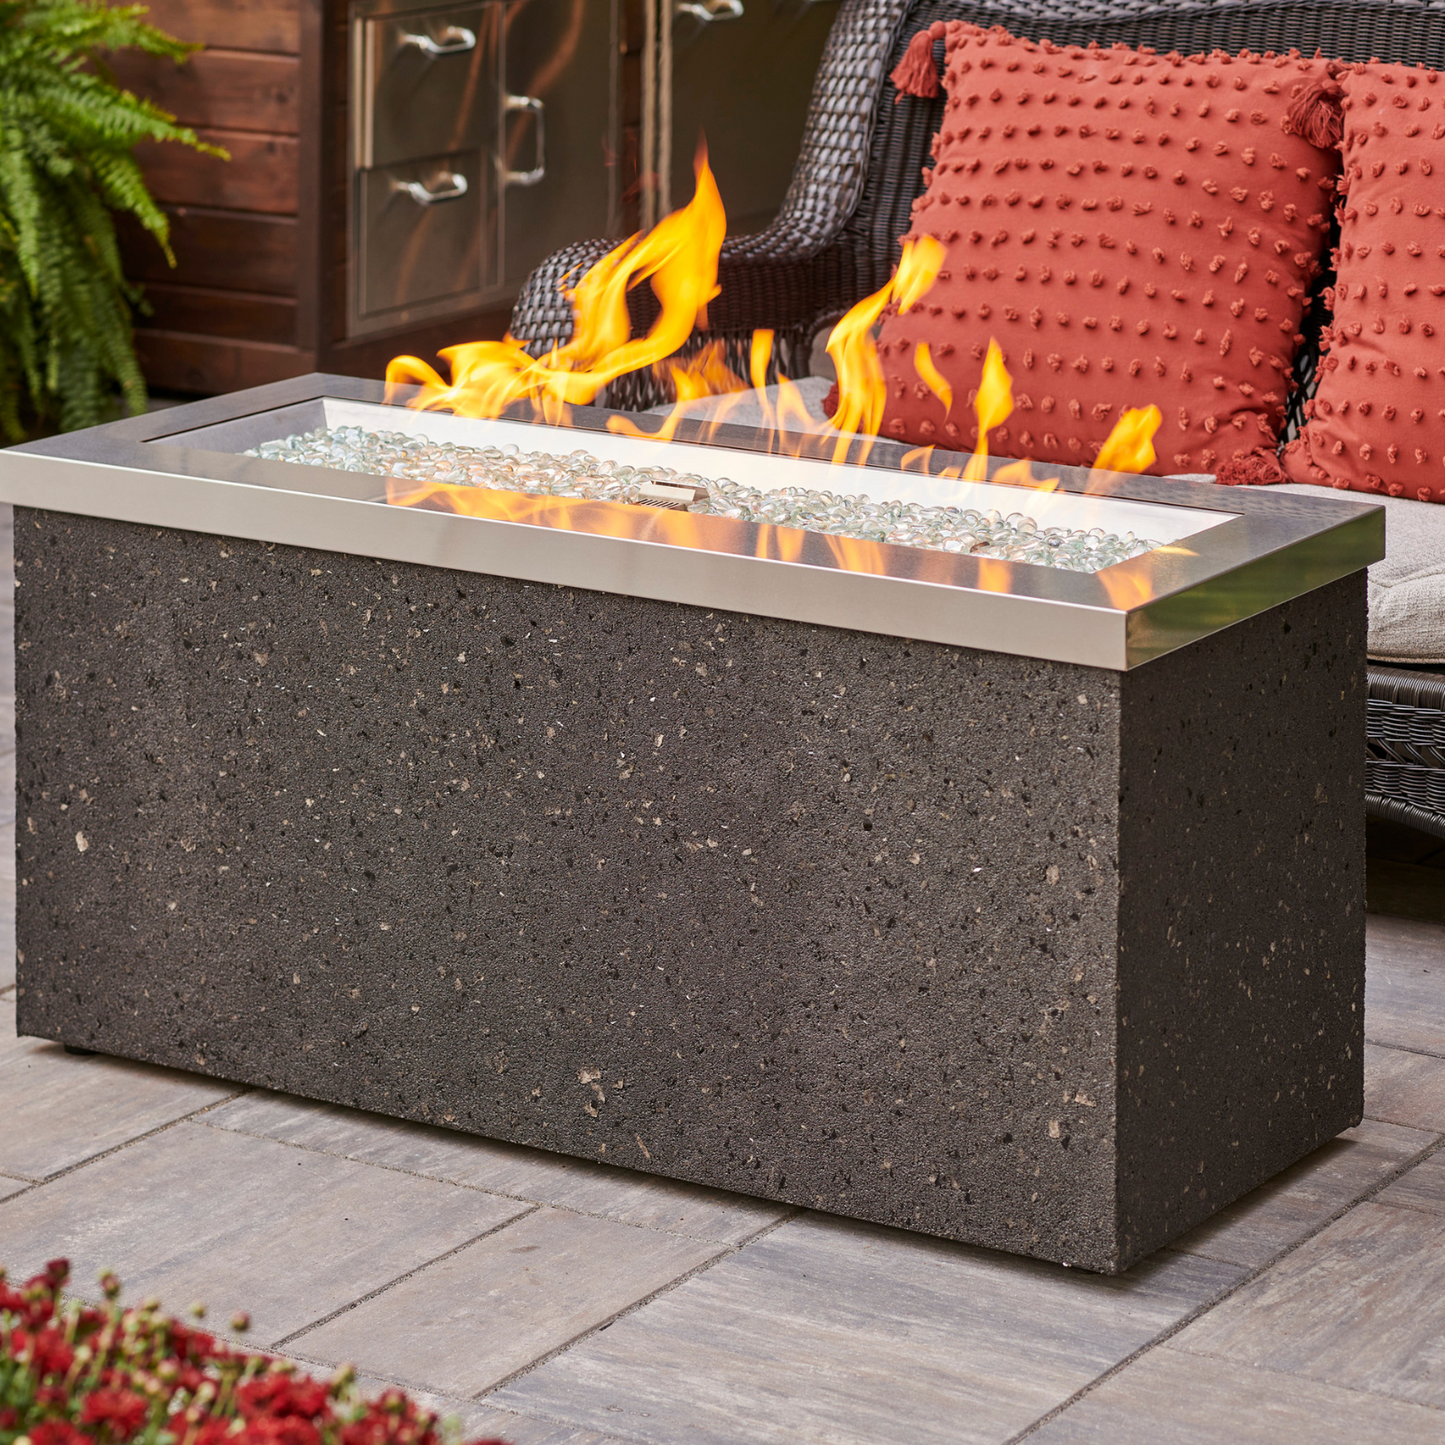 STAINLESS STELL KEY LARGO - 48" - Linear Gas Fire Pit Table